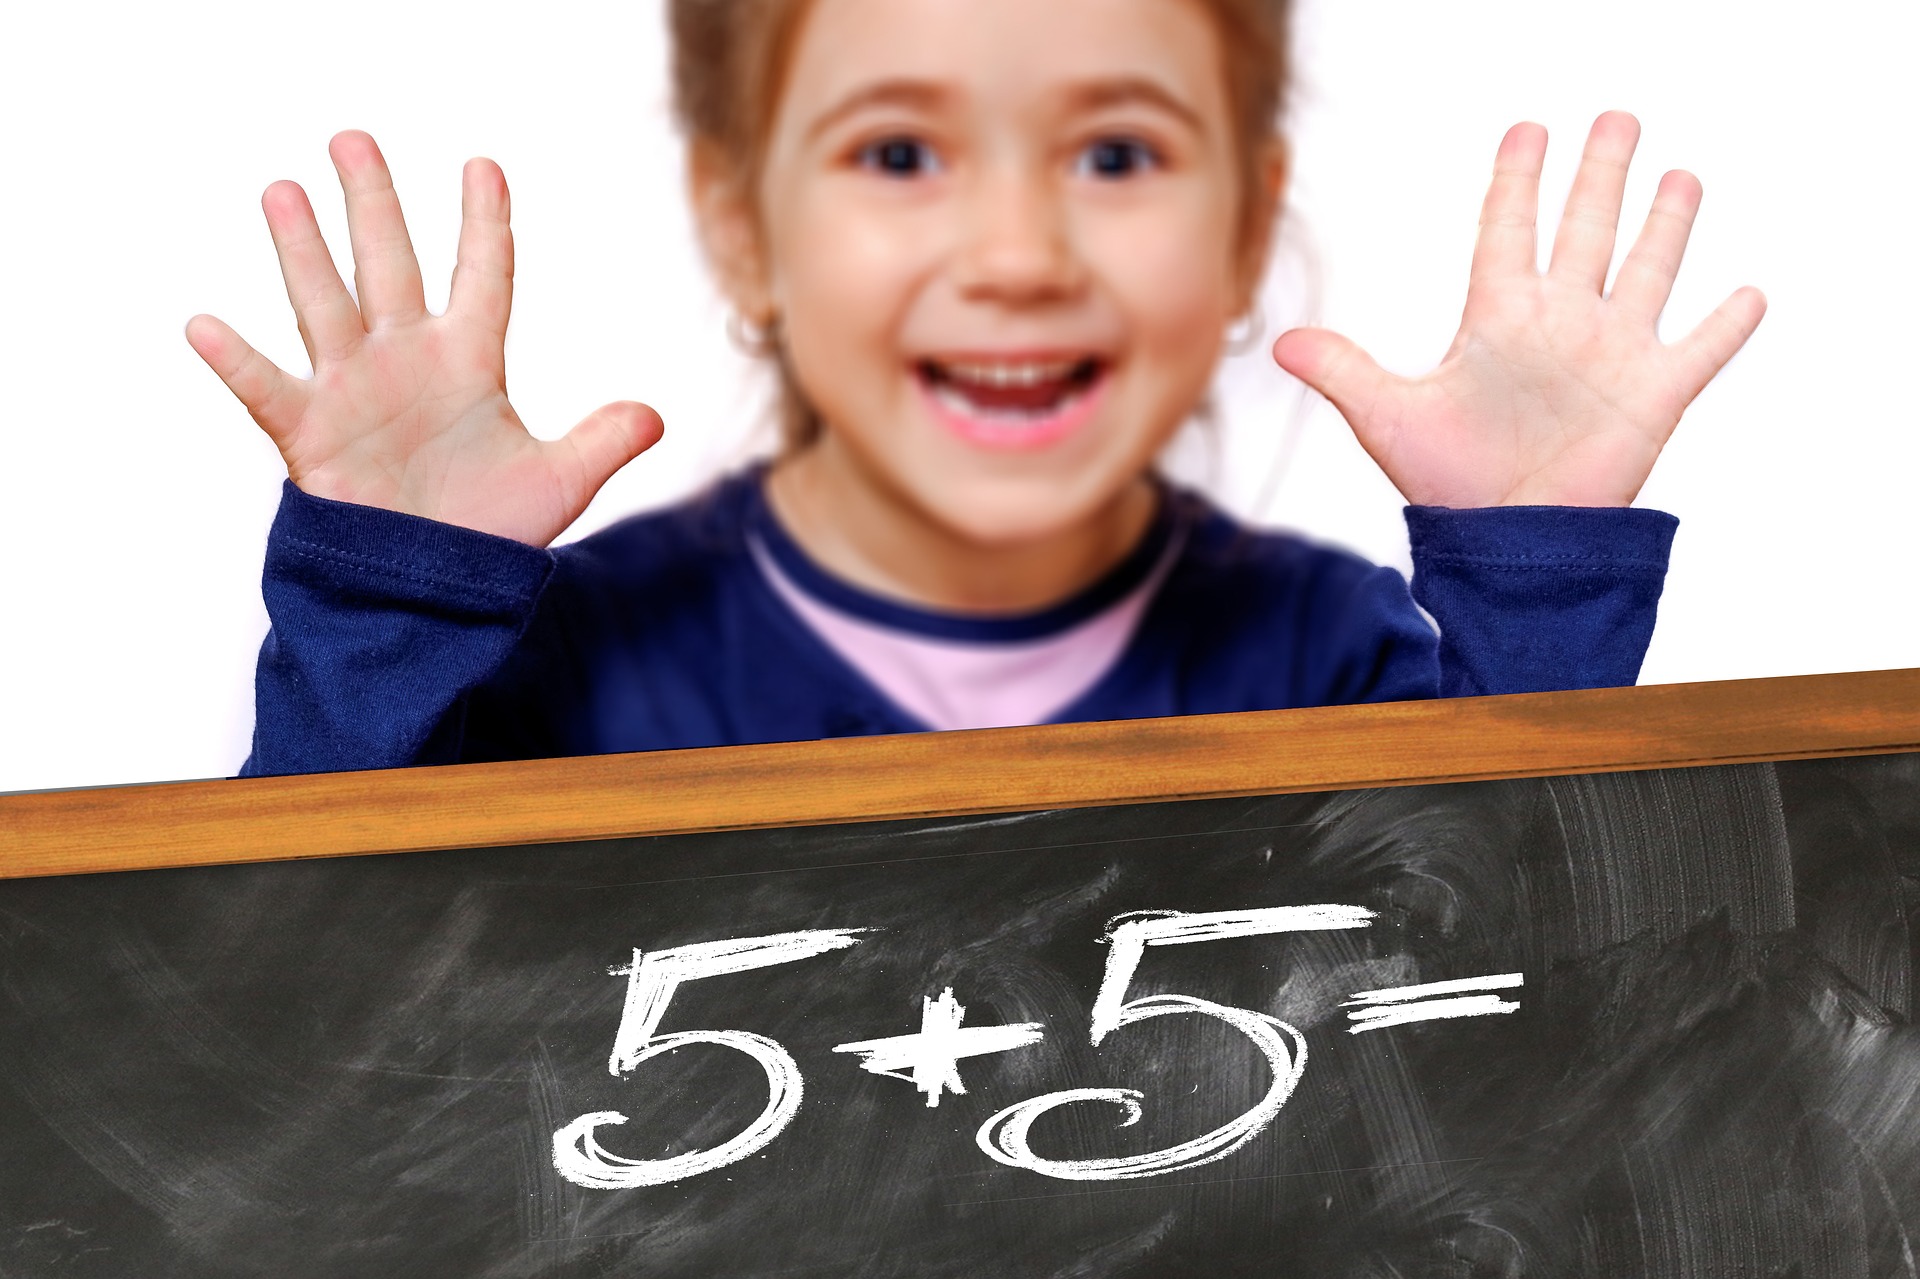 Why mental maths is important for children